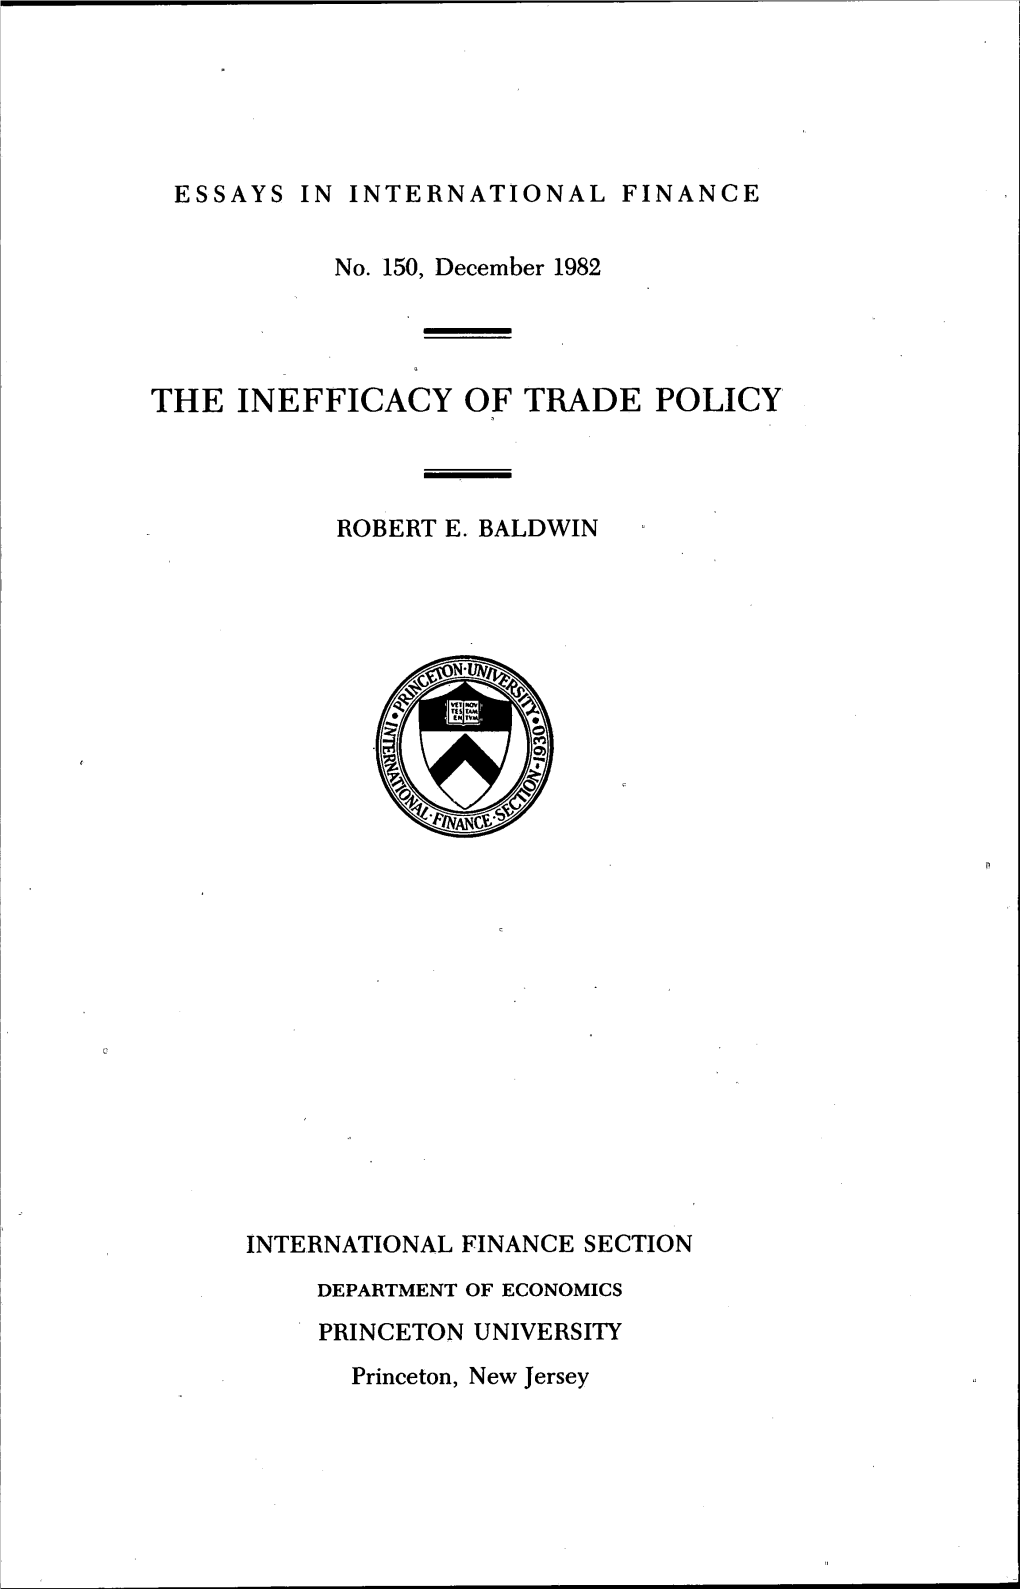 The Inefficacy of Trade Policy